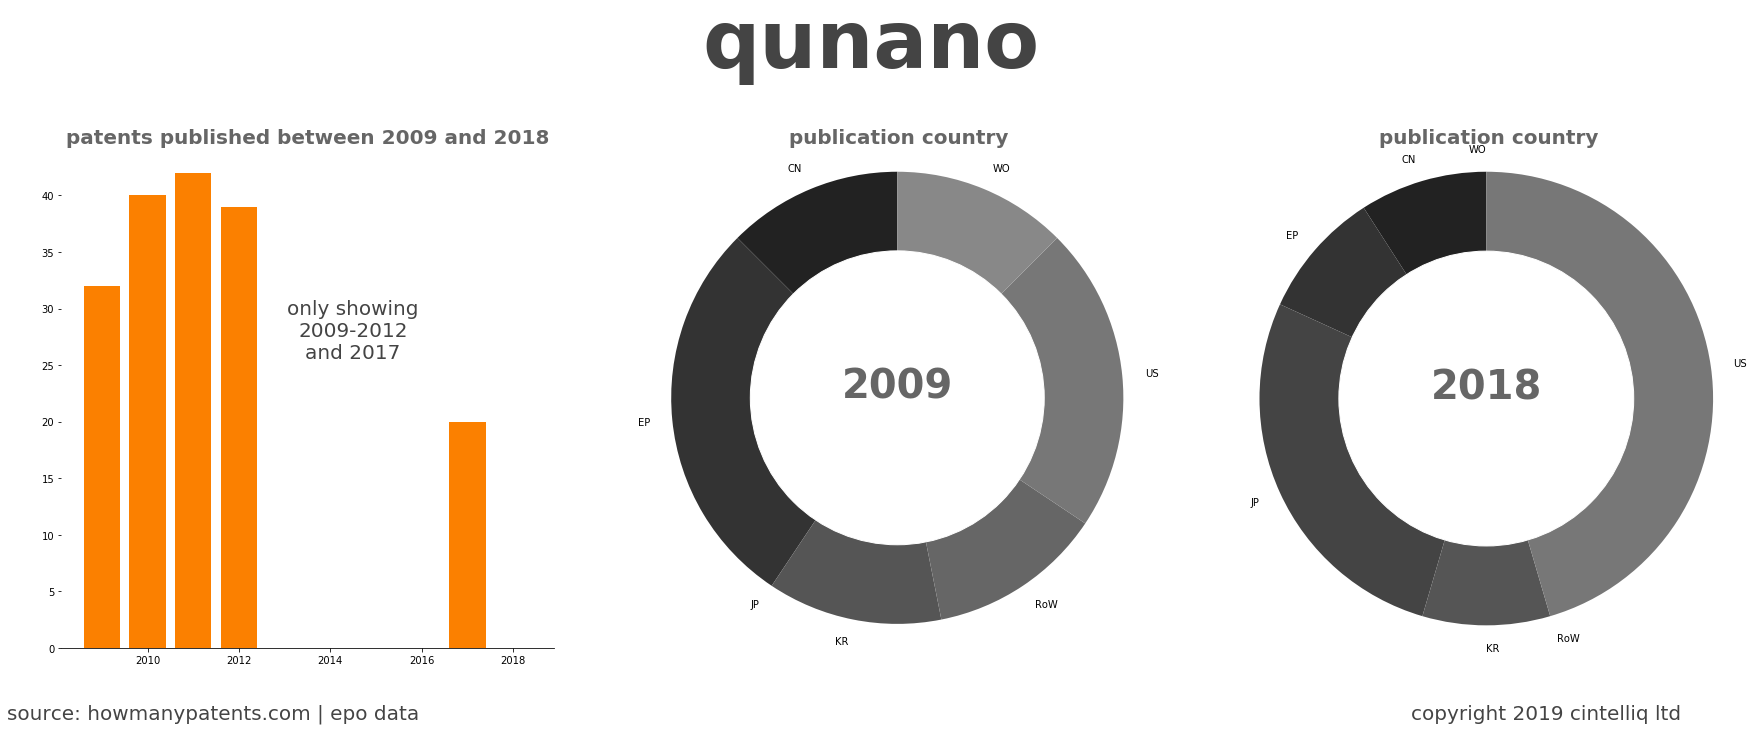 summary of patents for Qunano